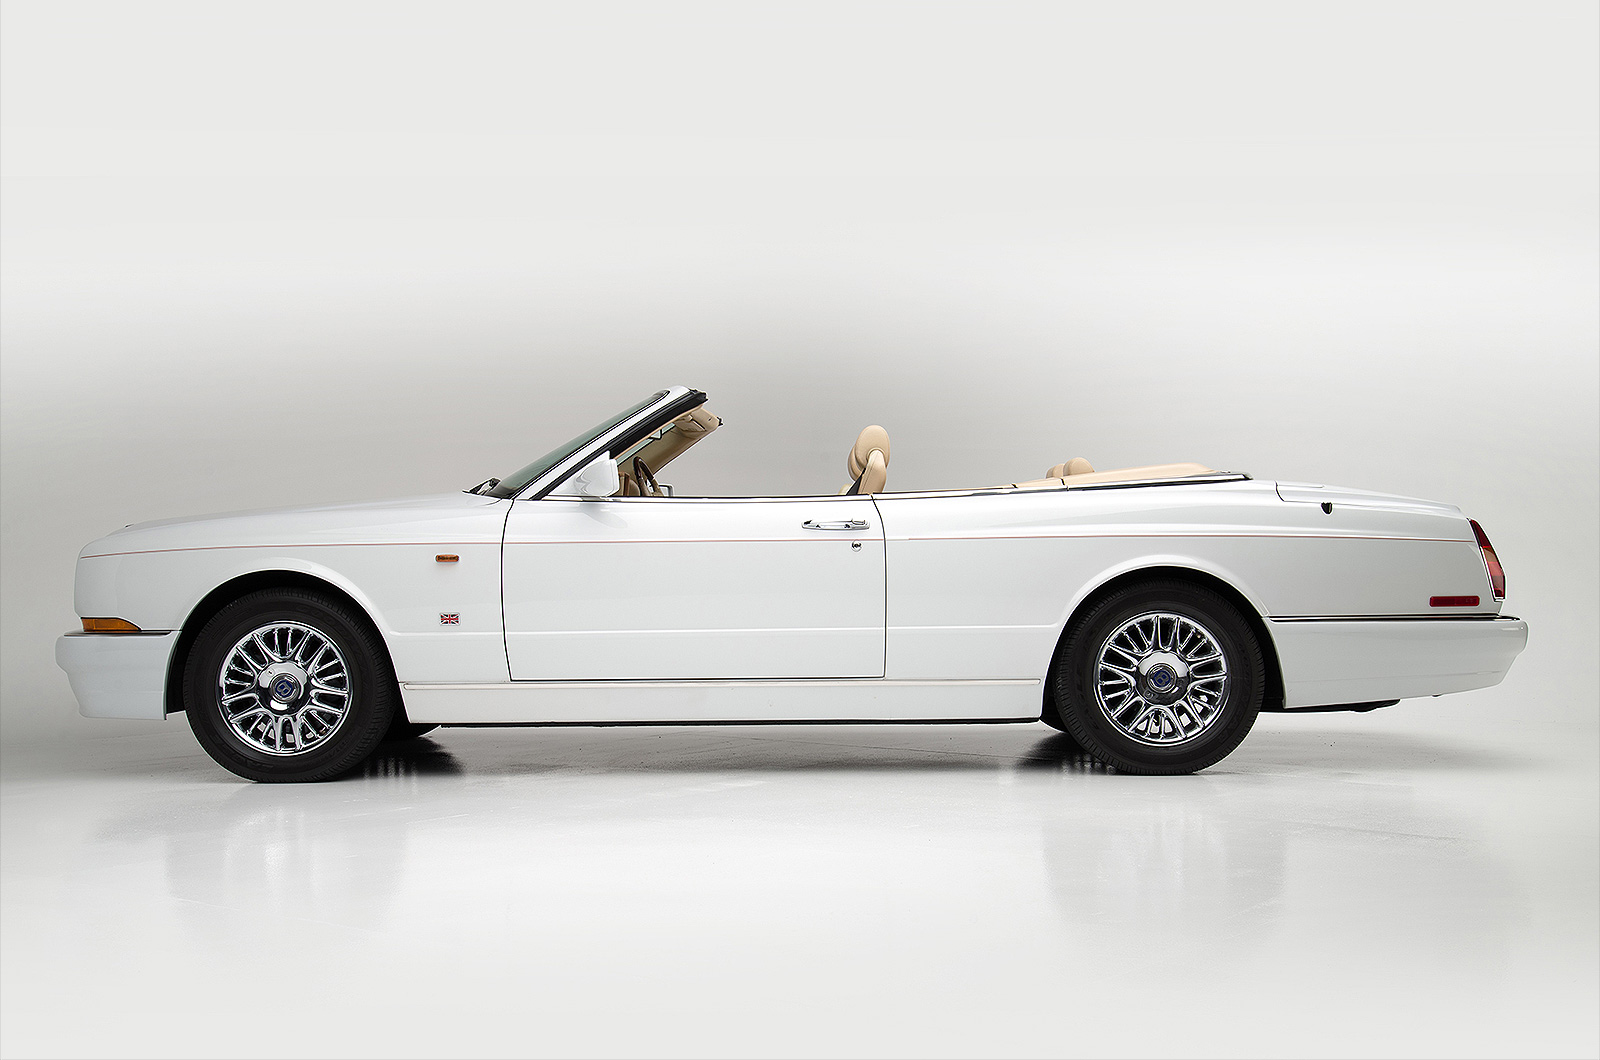 <p><span>The <strong>Bentley Azure </strong>was the world's most luxurious and desirable convertible when it arrived in the mid-1990s. Based on the same floorpan as the Bentley Continental R, the metamorphosis into the Azure was overseen by <strong>Pininfarina</strong>. Power (all <strong>390 HP </strong>of it) came from a single-turbo version of the 6.75-liter push-rod V8 and by the time production had ended in 2003, Bentley had built <strong>1403 </strong>Azures.</span></p>